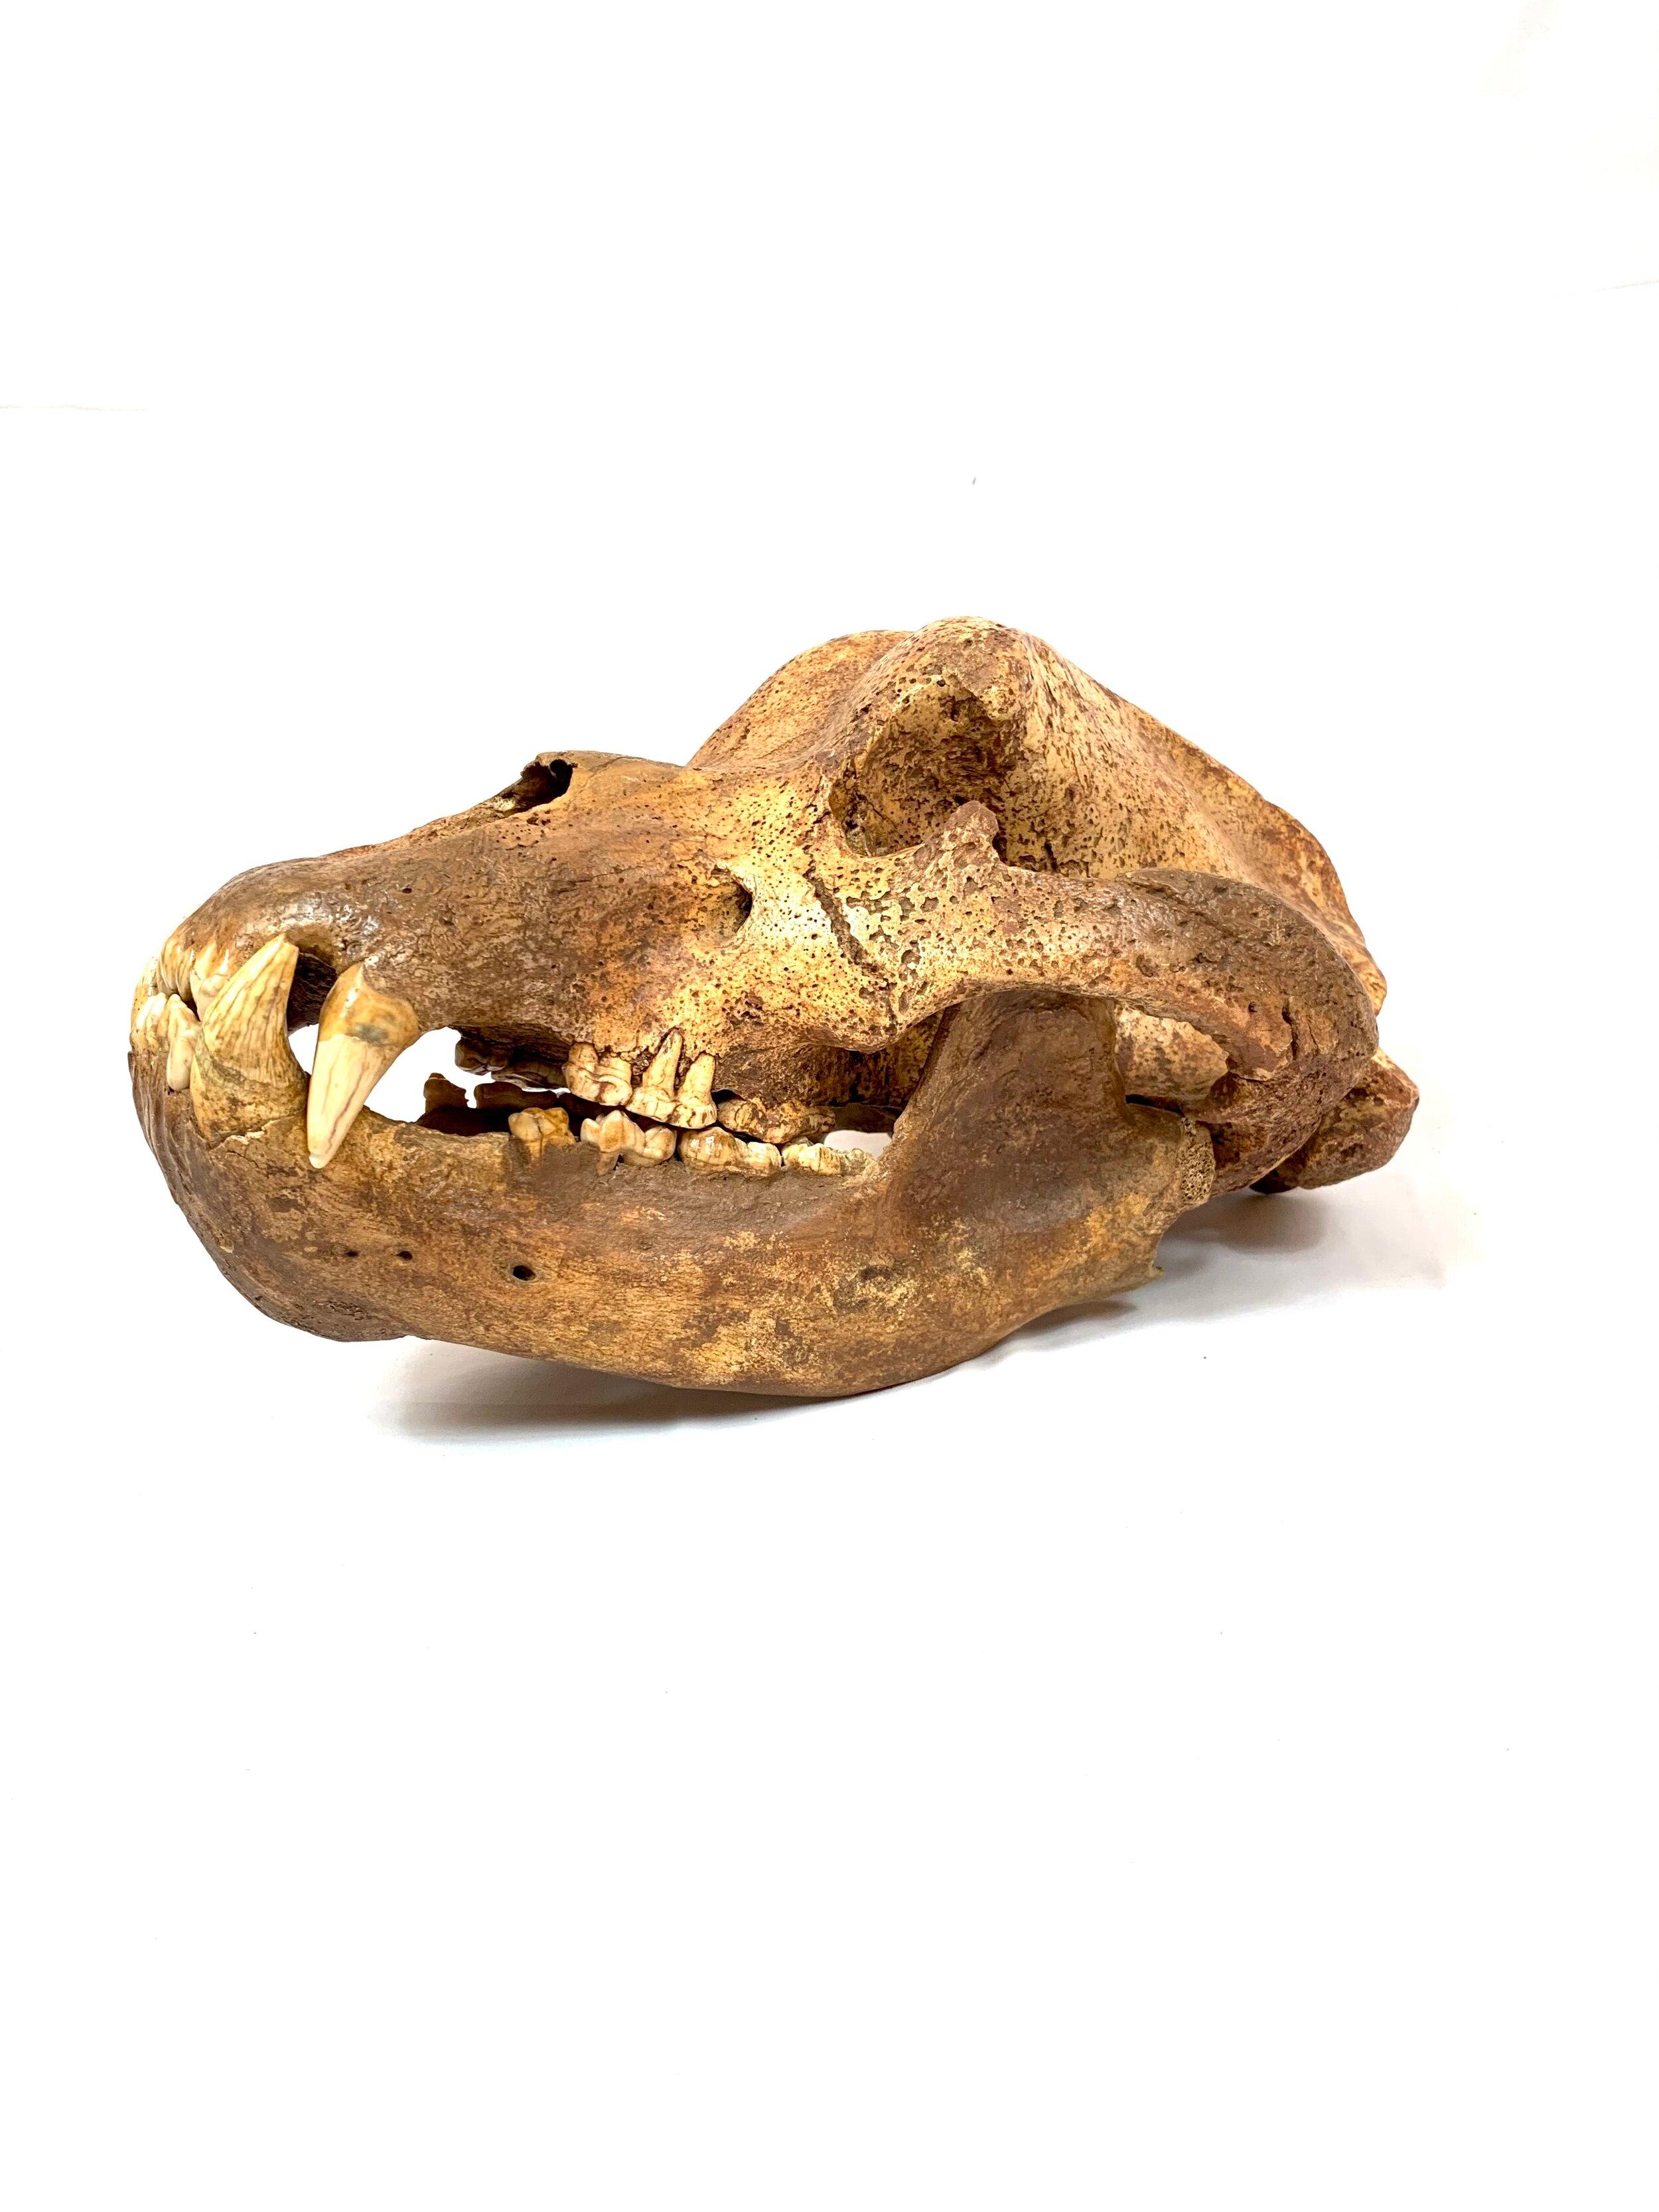 Skull of extinct cave bear from Mixnitz, Austria. Circa 70,000 Years Old

From rare dinosaur skulls and Stone Age tools to the world’s earliest animals that date back millions of years, the Extraordinary Objects collection of natural history and